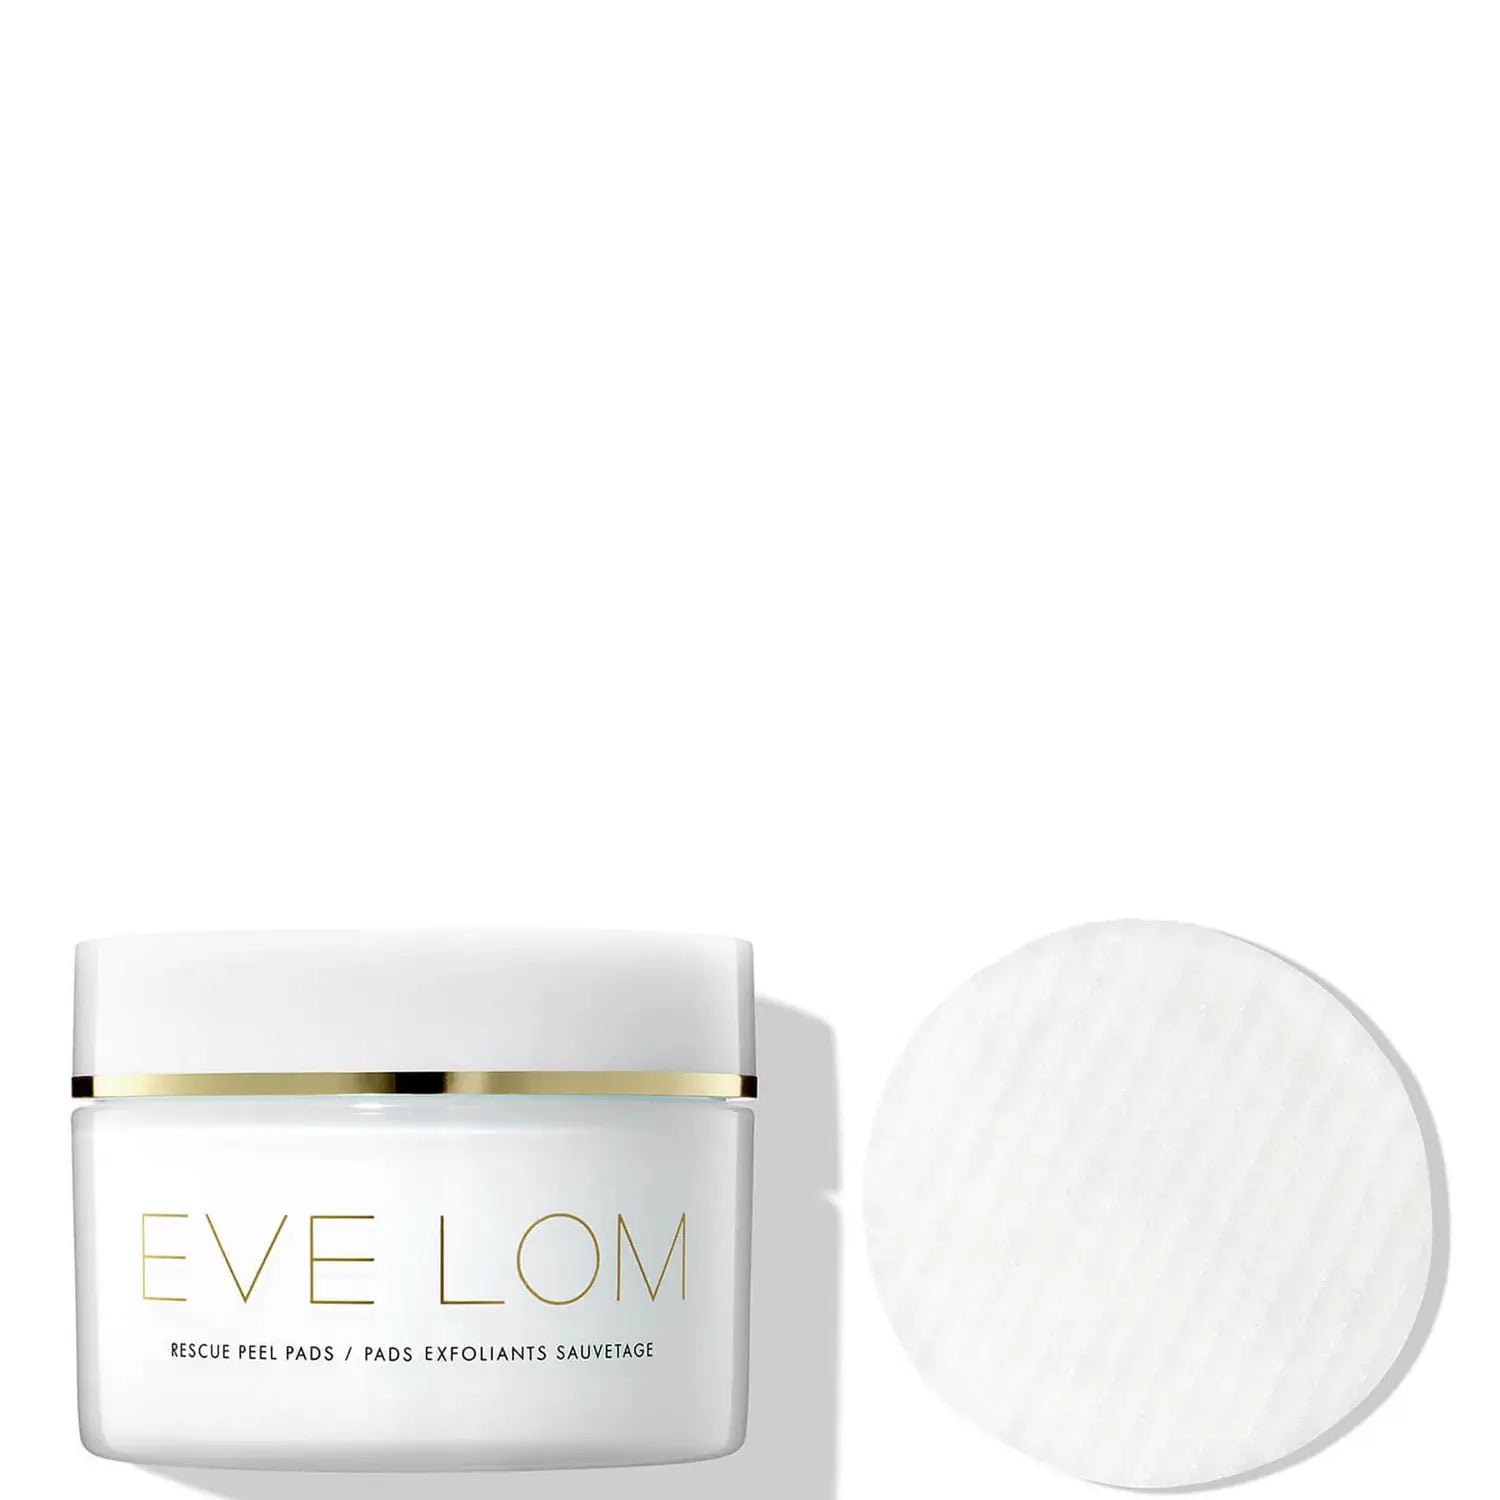 Eve Lom Rescue Peel Pads (60 Pads) - Exfoliating and Resurfacing Treatment with BHA, PHA, and AHA Acids. Reveals smoother, brighter, and revitalized complexion. Contains Glycolic Acid, Multi-Fruit Acid Complex, and Lactic Acid for hydration and conditioning. Removes build-up and soothes irritation. 100% Biodegradable materials. Paraben, Phthalate, Sulphate, and Cruelty-free. Key benefits include decongesting pores, gentle exfoliation, preserving moisture, soothing effect, and increased hydration levels. How